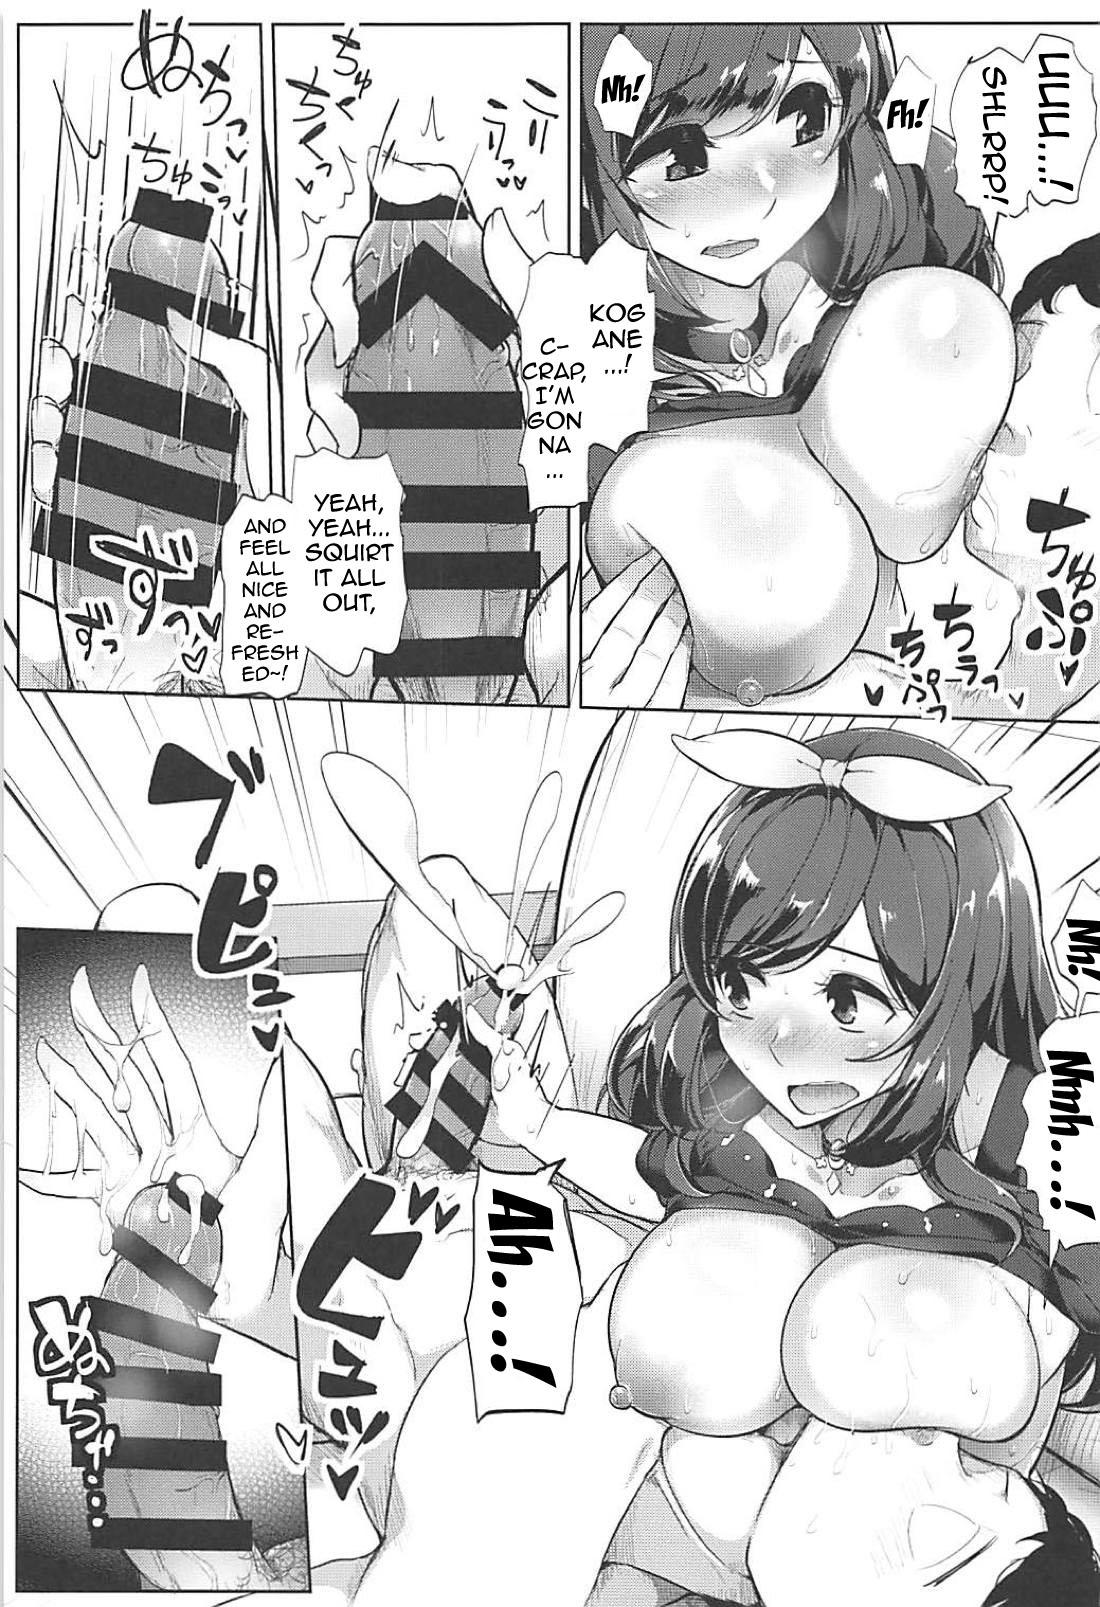 Tease P e no Suki wa Tomeraren bai - When I Just Can't Stop Loving The Producer - The idolmaster Hooker - Page 4